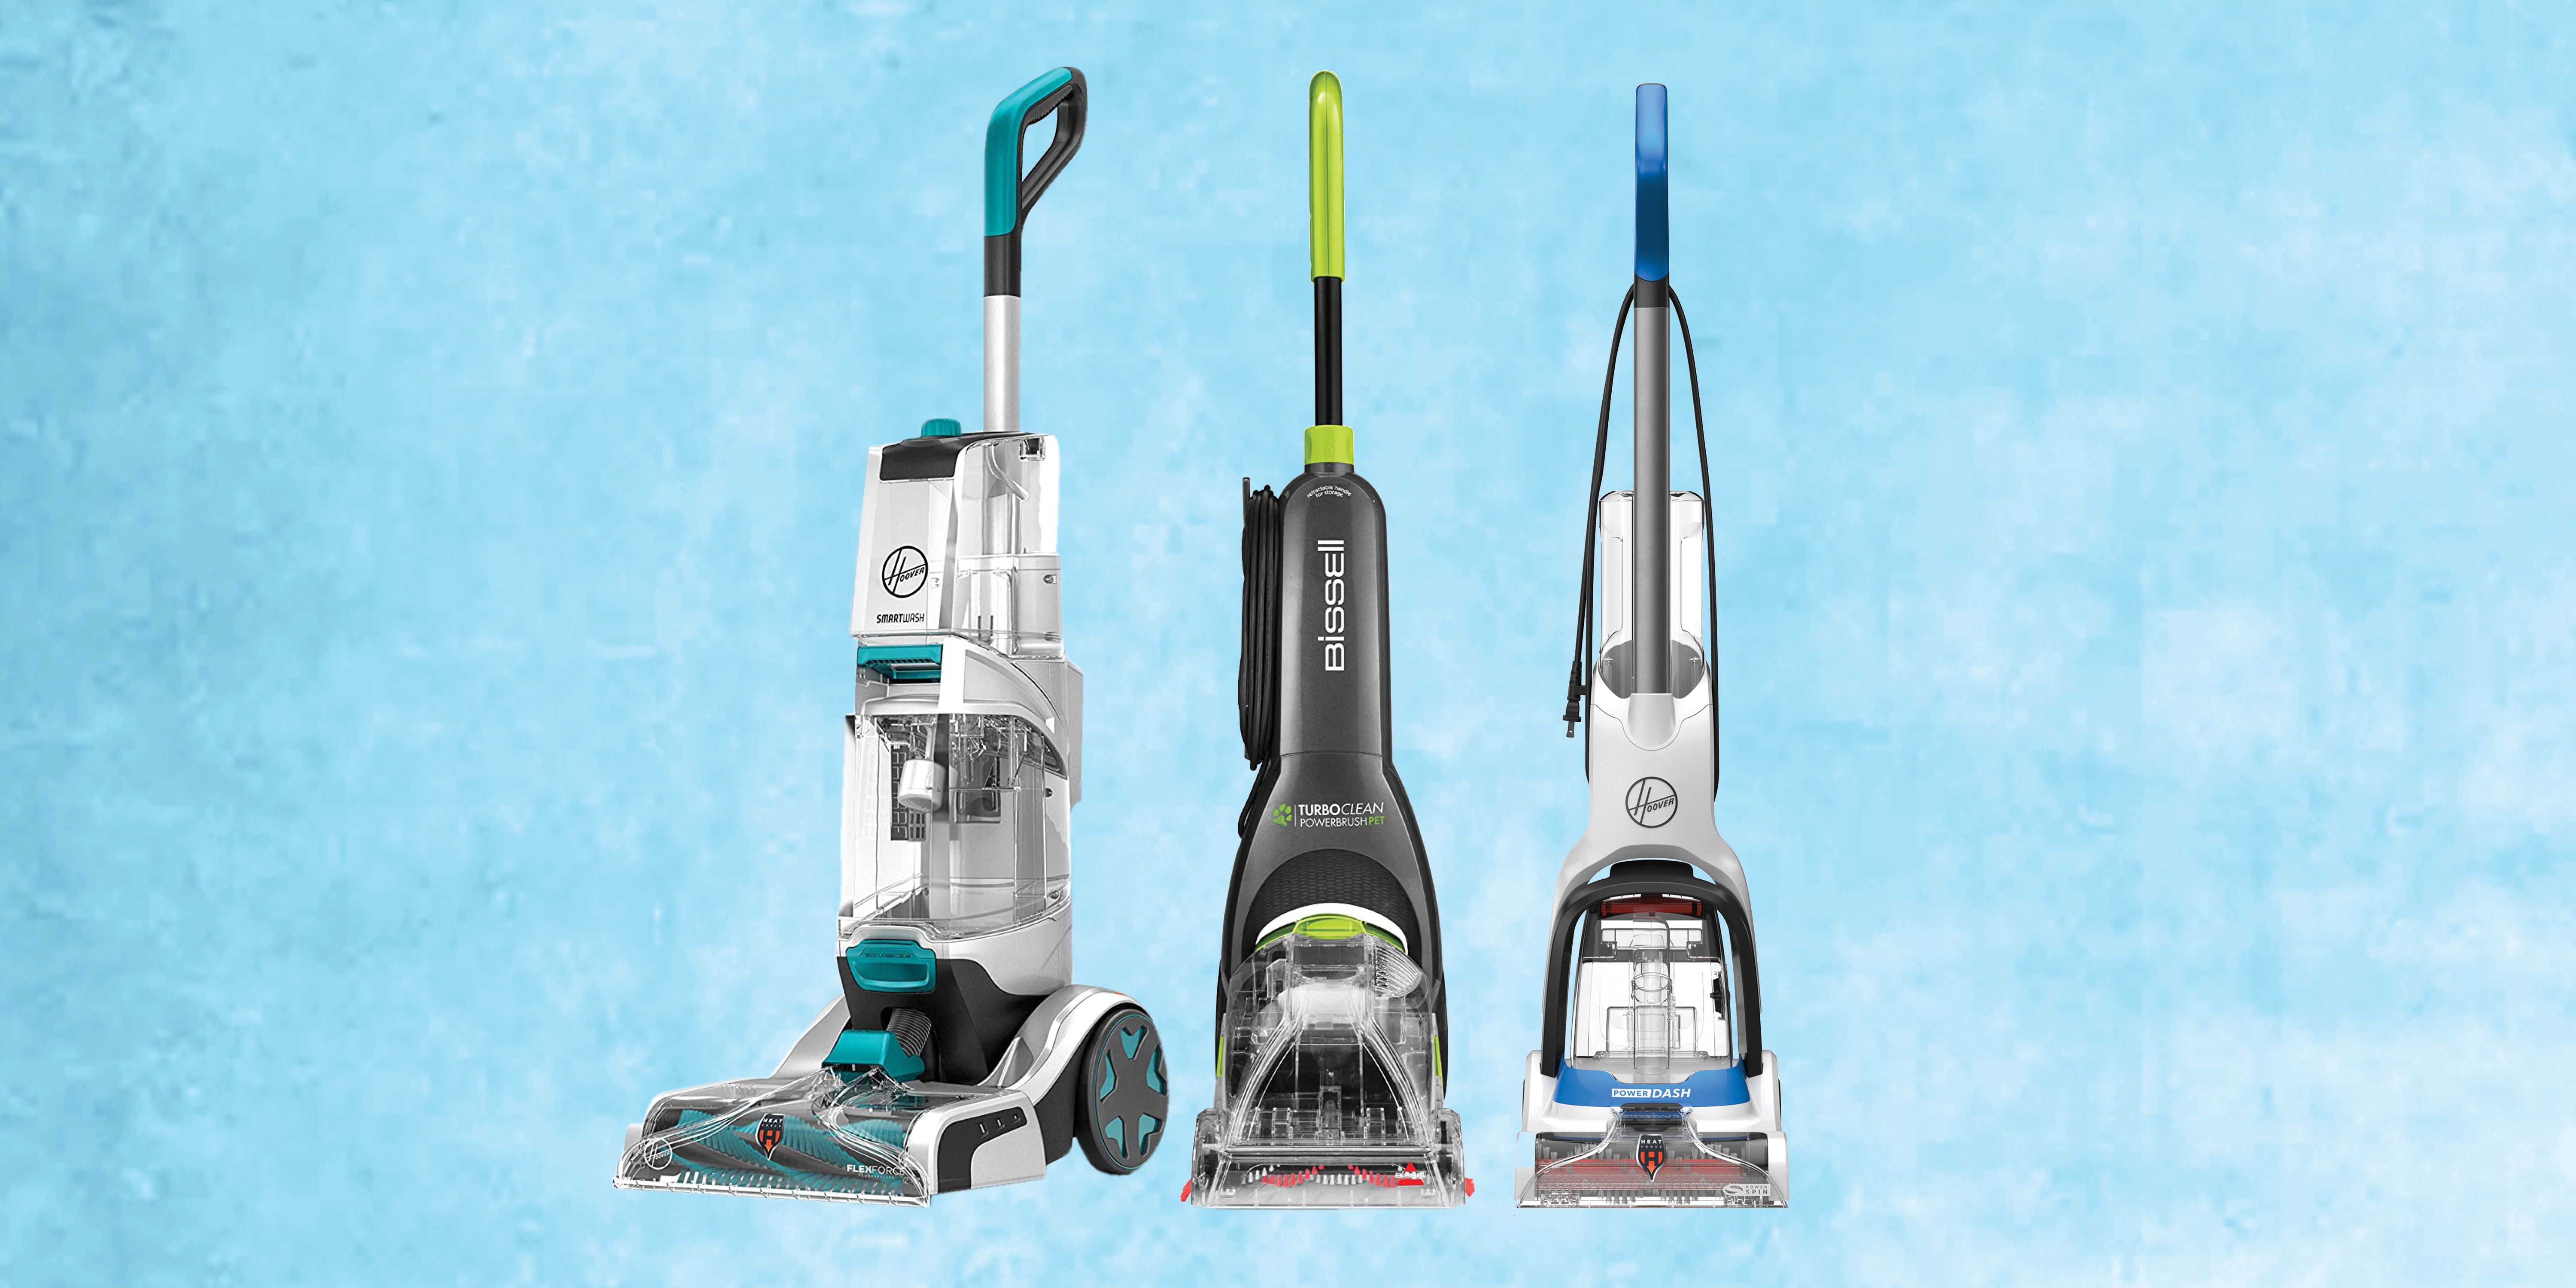 7 Best Carpet Cleaners You Can Online According To Reviews In 2023